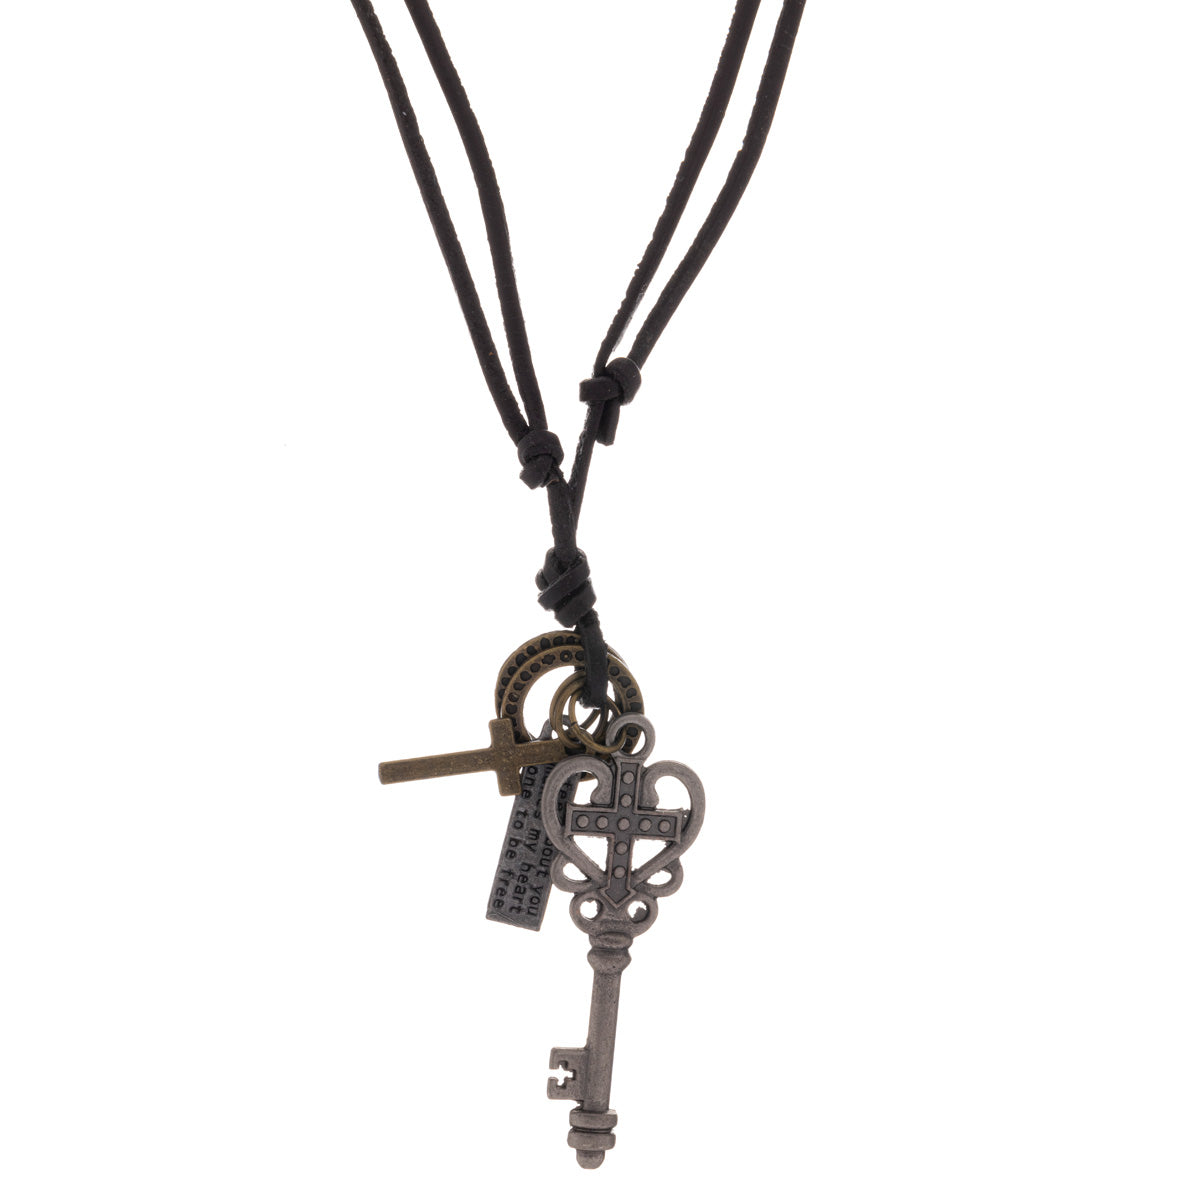 The key pendant necklace in the leather ribbon